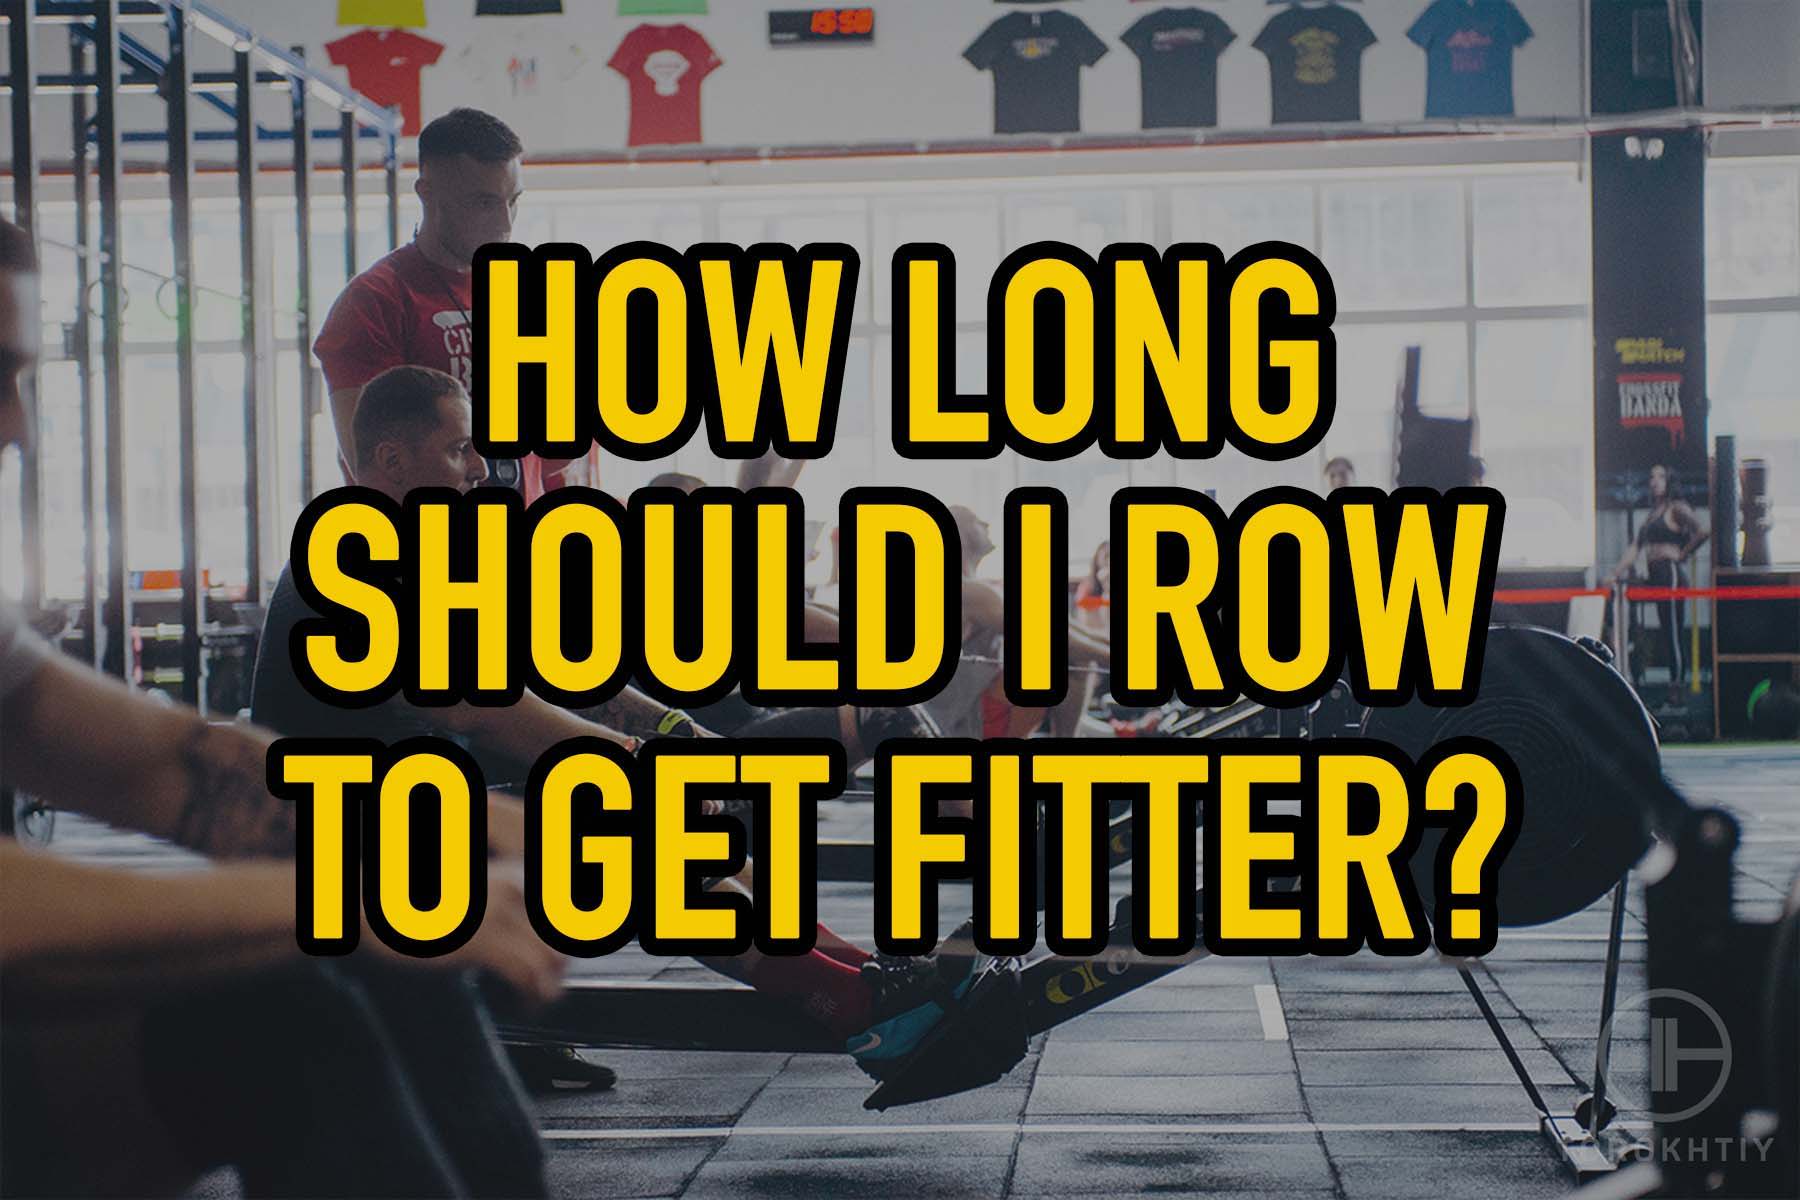 how long should I row to get fitter